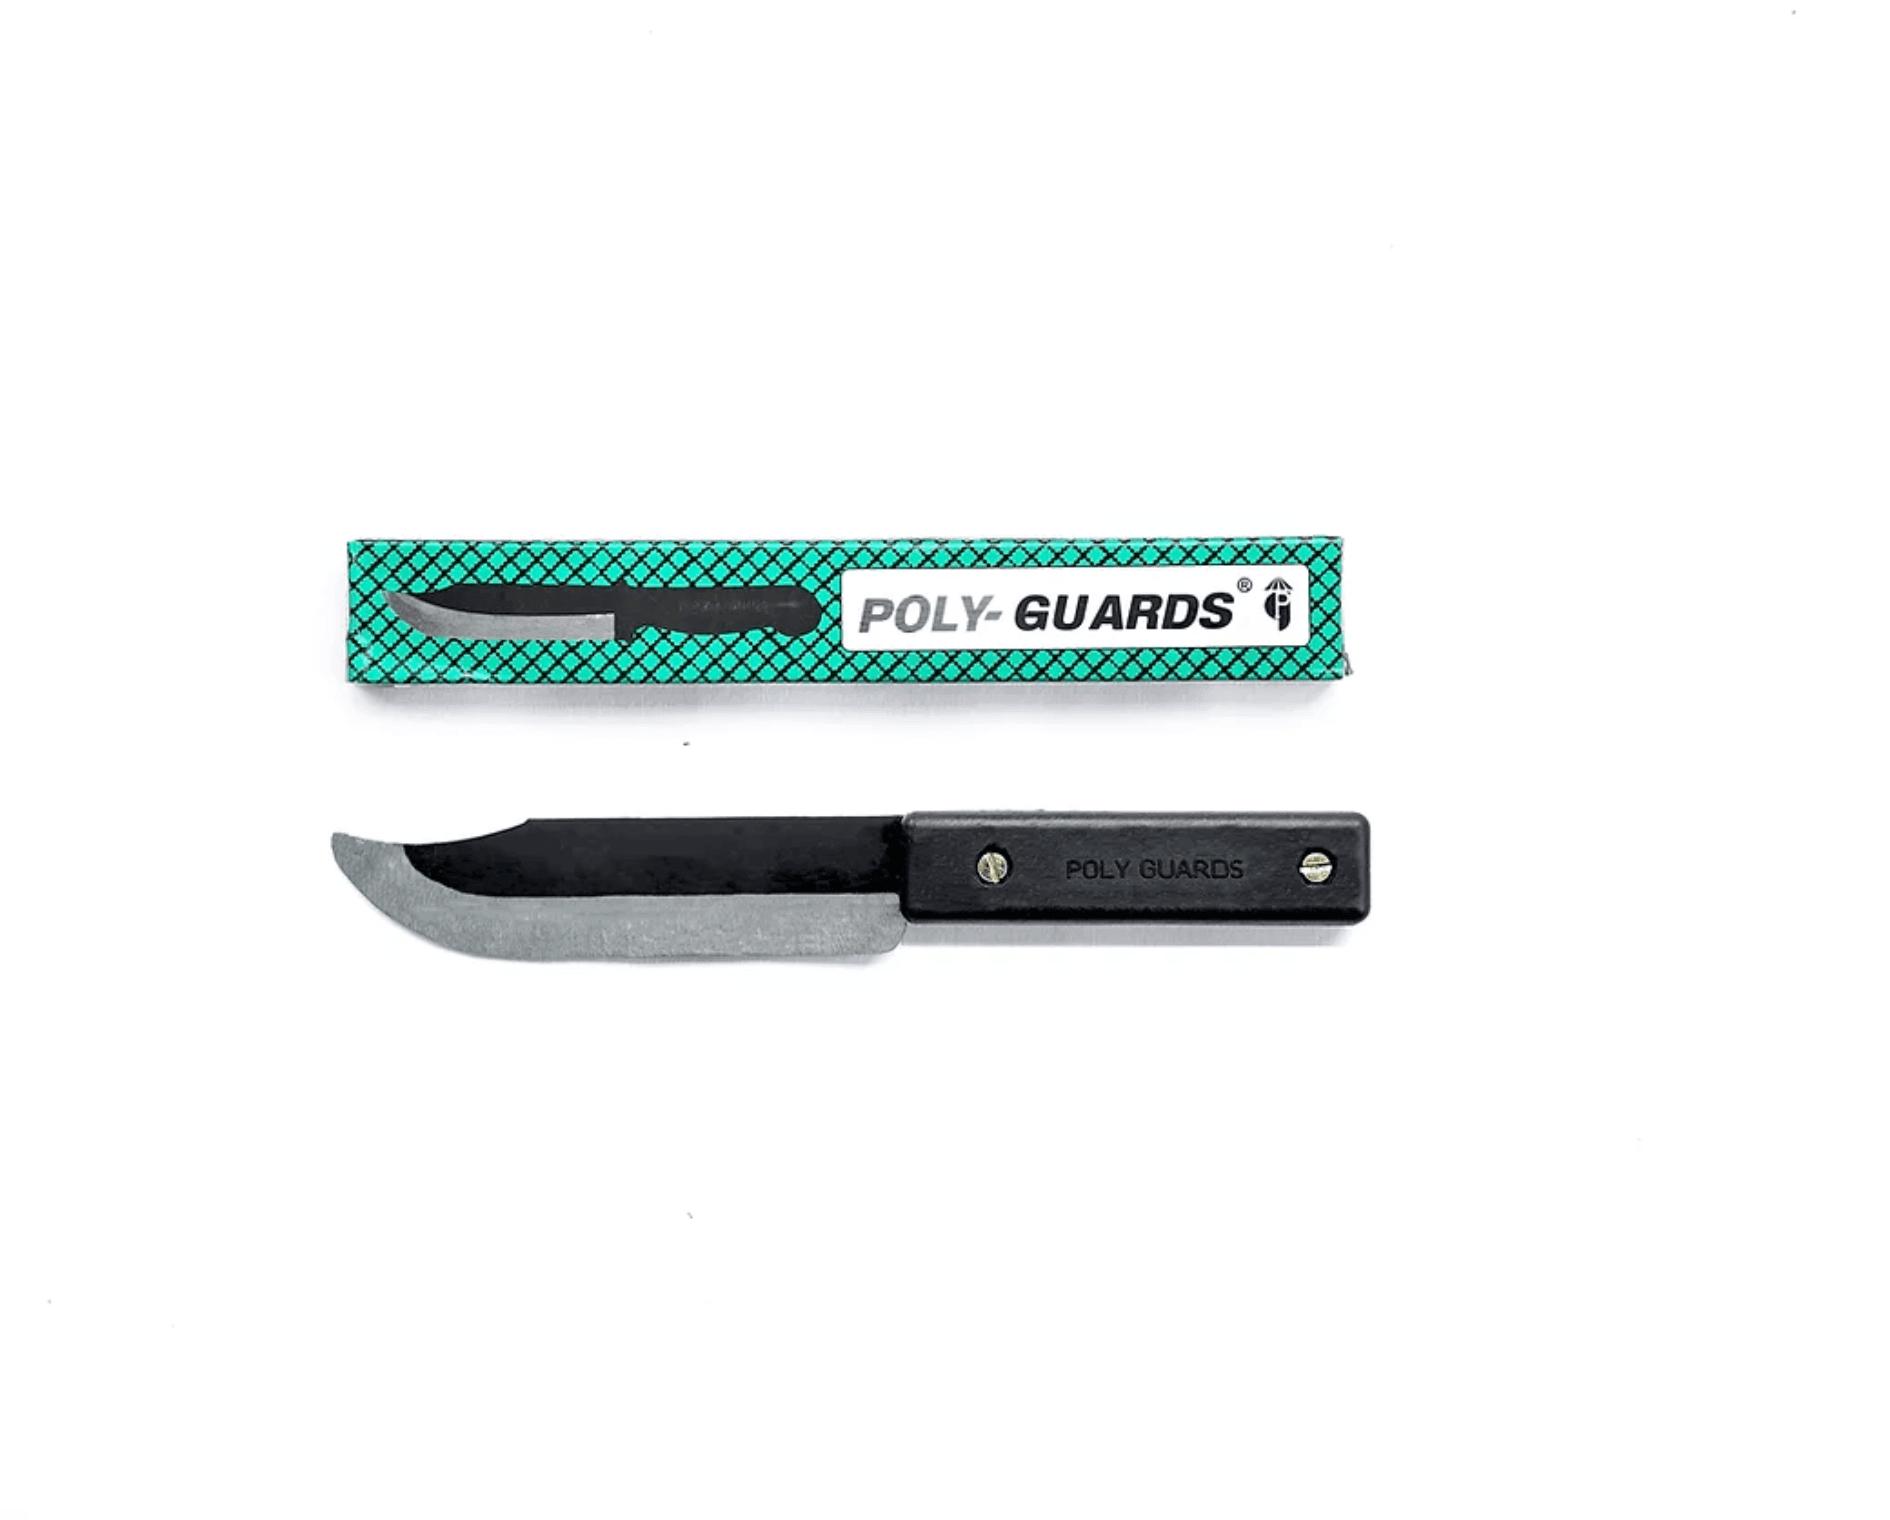 Indian Kitchen Knife (Pointed End) - www.indiancart.com.au - Kitchen Knife - - Poly Guards